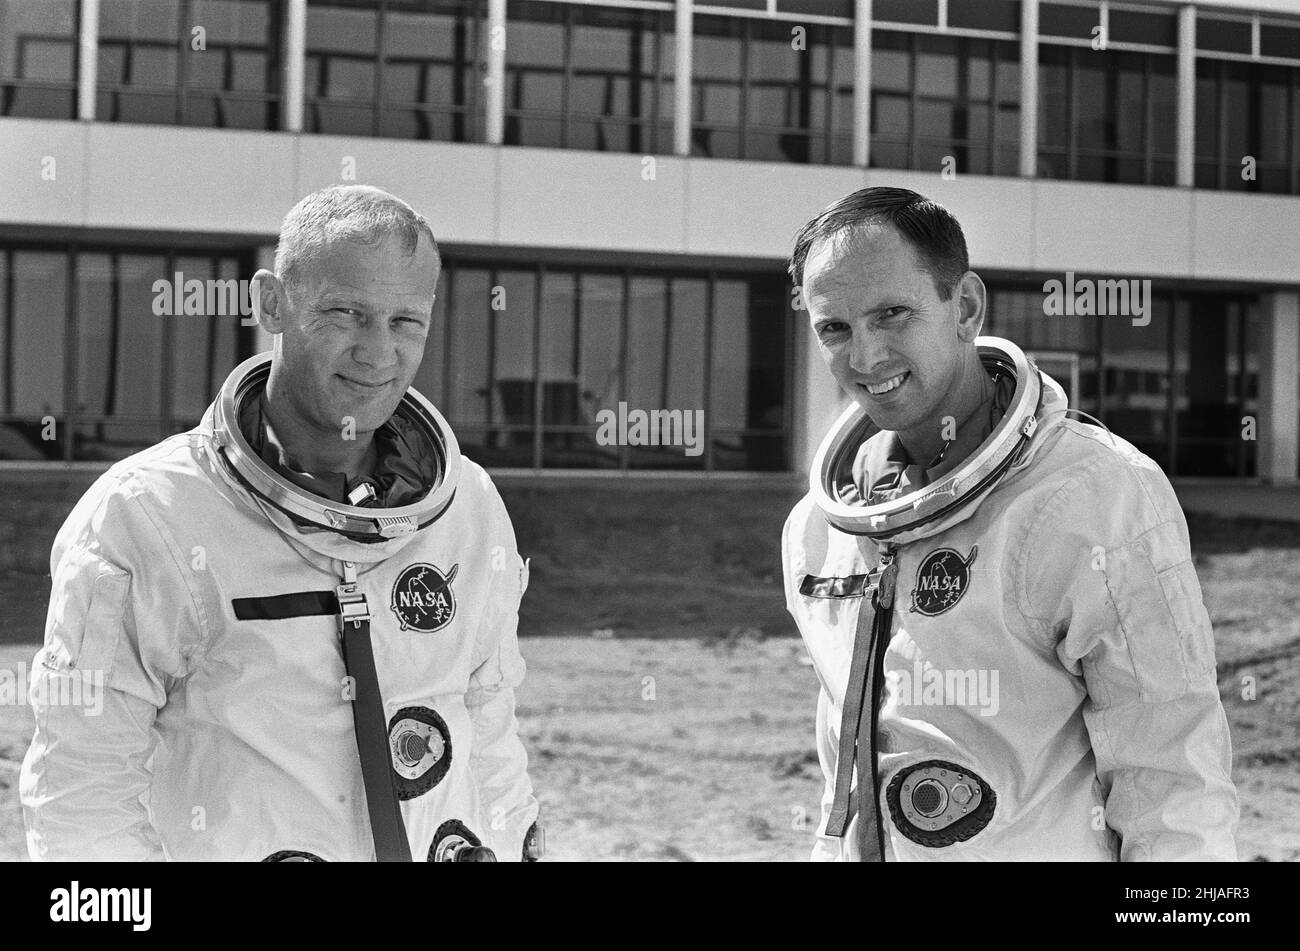 Astronauts Edwin Eugene Buzz Aldrin (Left) and Theodore Cordy Ted Freeman (Right) seen here at the Johnson Space Centre in Houston, Texas. Where they were training for the Gemini space program. 30th October 1964Astronaut Ted Freeman sadly died in an aircraft accident the day after this image was captured Stock Photo